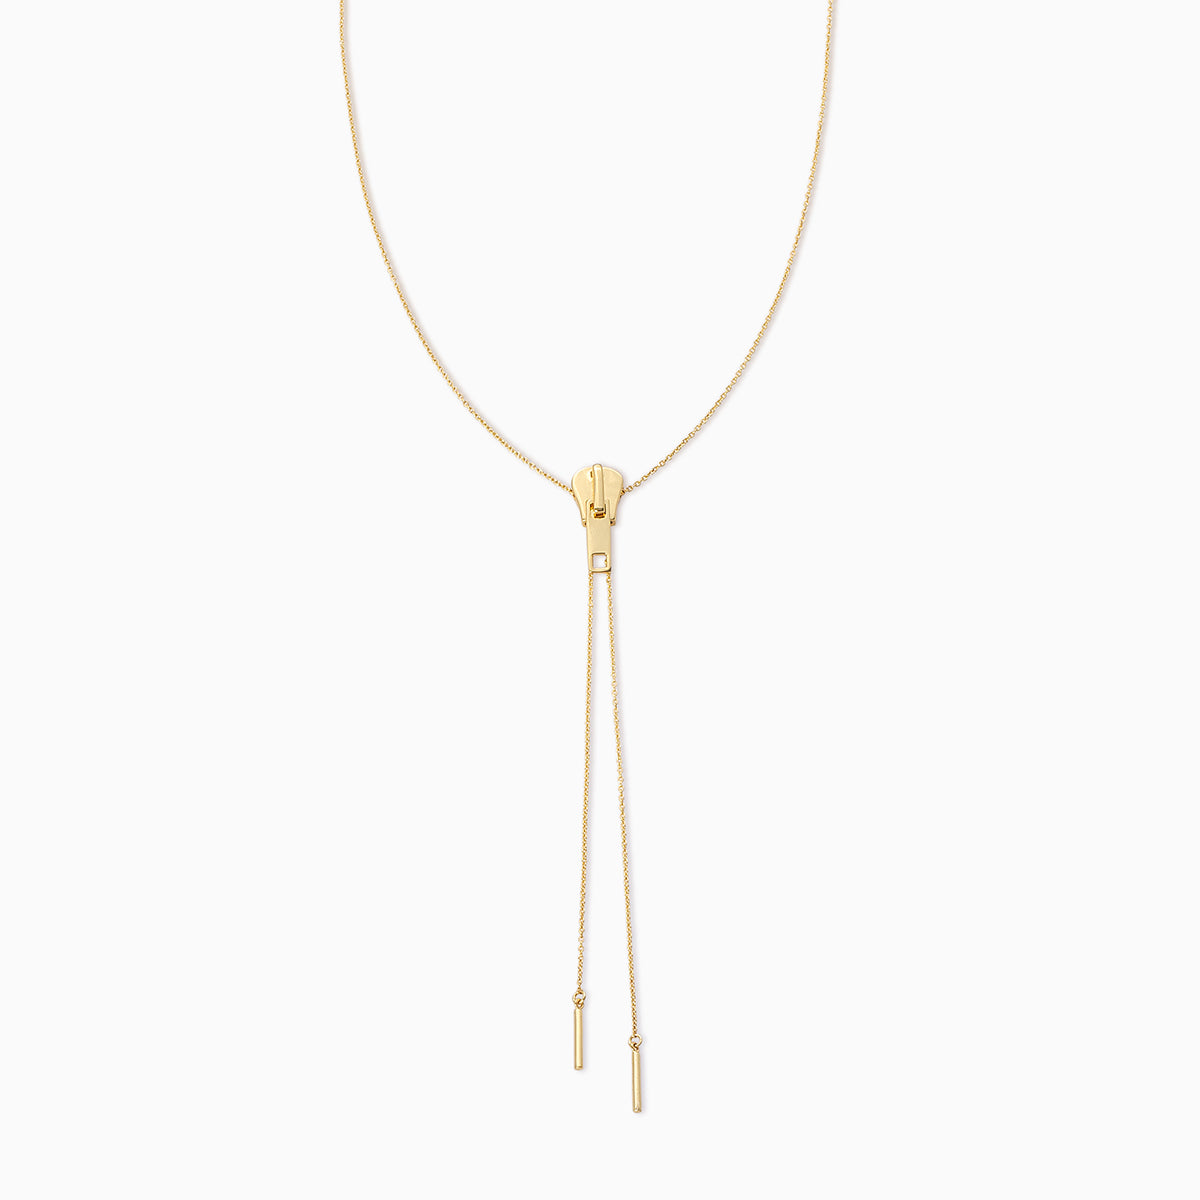 Adjustable Zipper Necklace | Gold | Product Image | Uncommon James